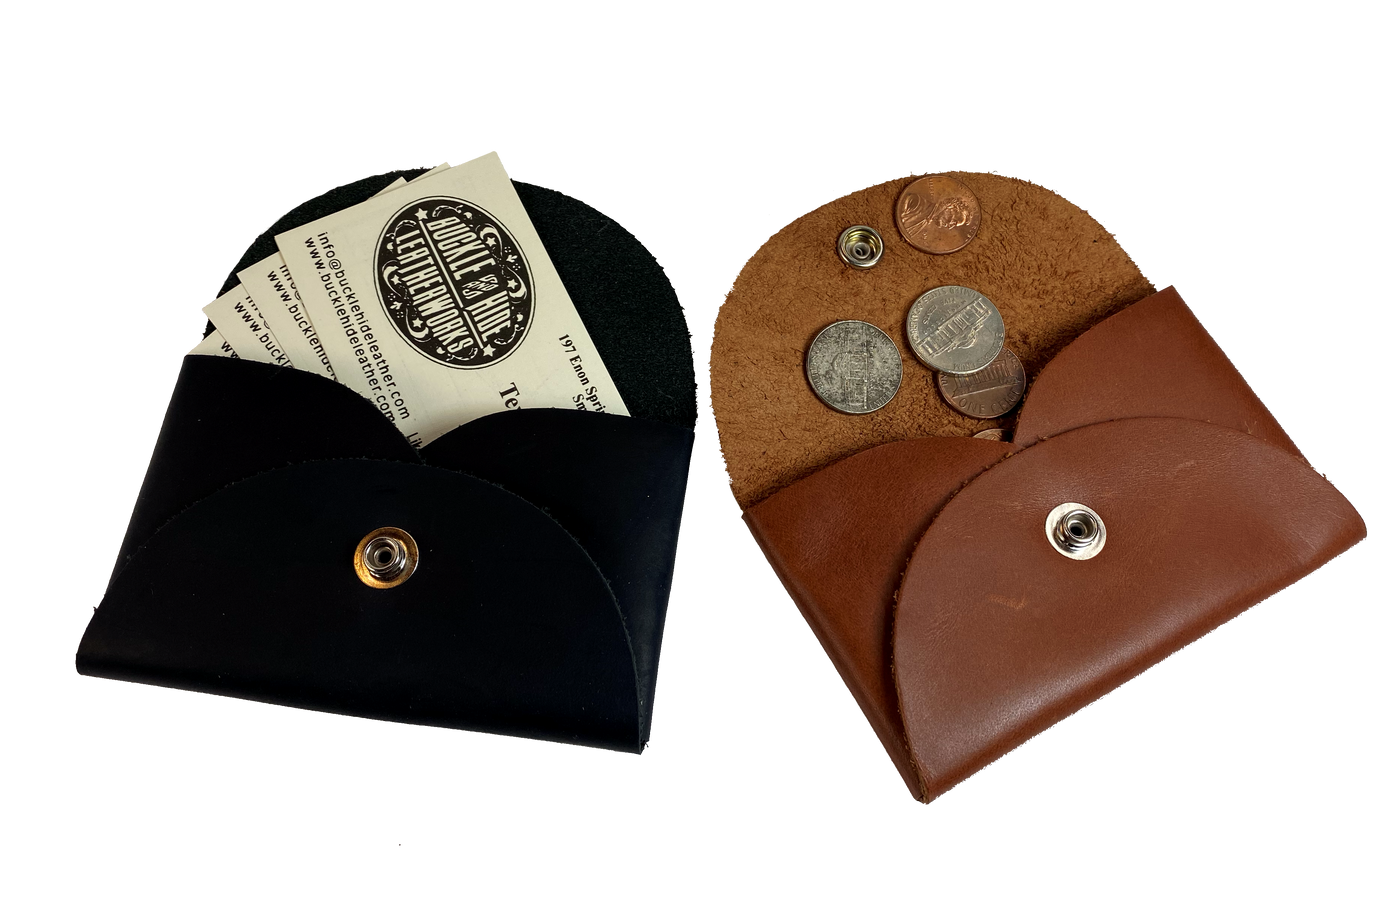 Handmade leather coin wallet with silver colored snap closure  so that coins and other small items may be carried.  Fits in the palm of the hand. BUY MORE and SAVE!  Available in either assorted brown or black leather.  Made in USA